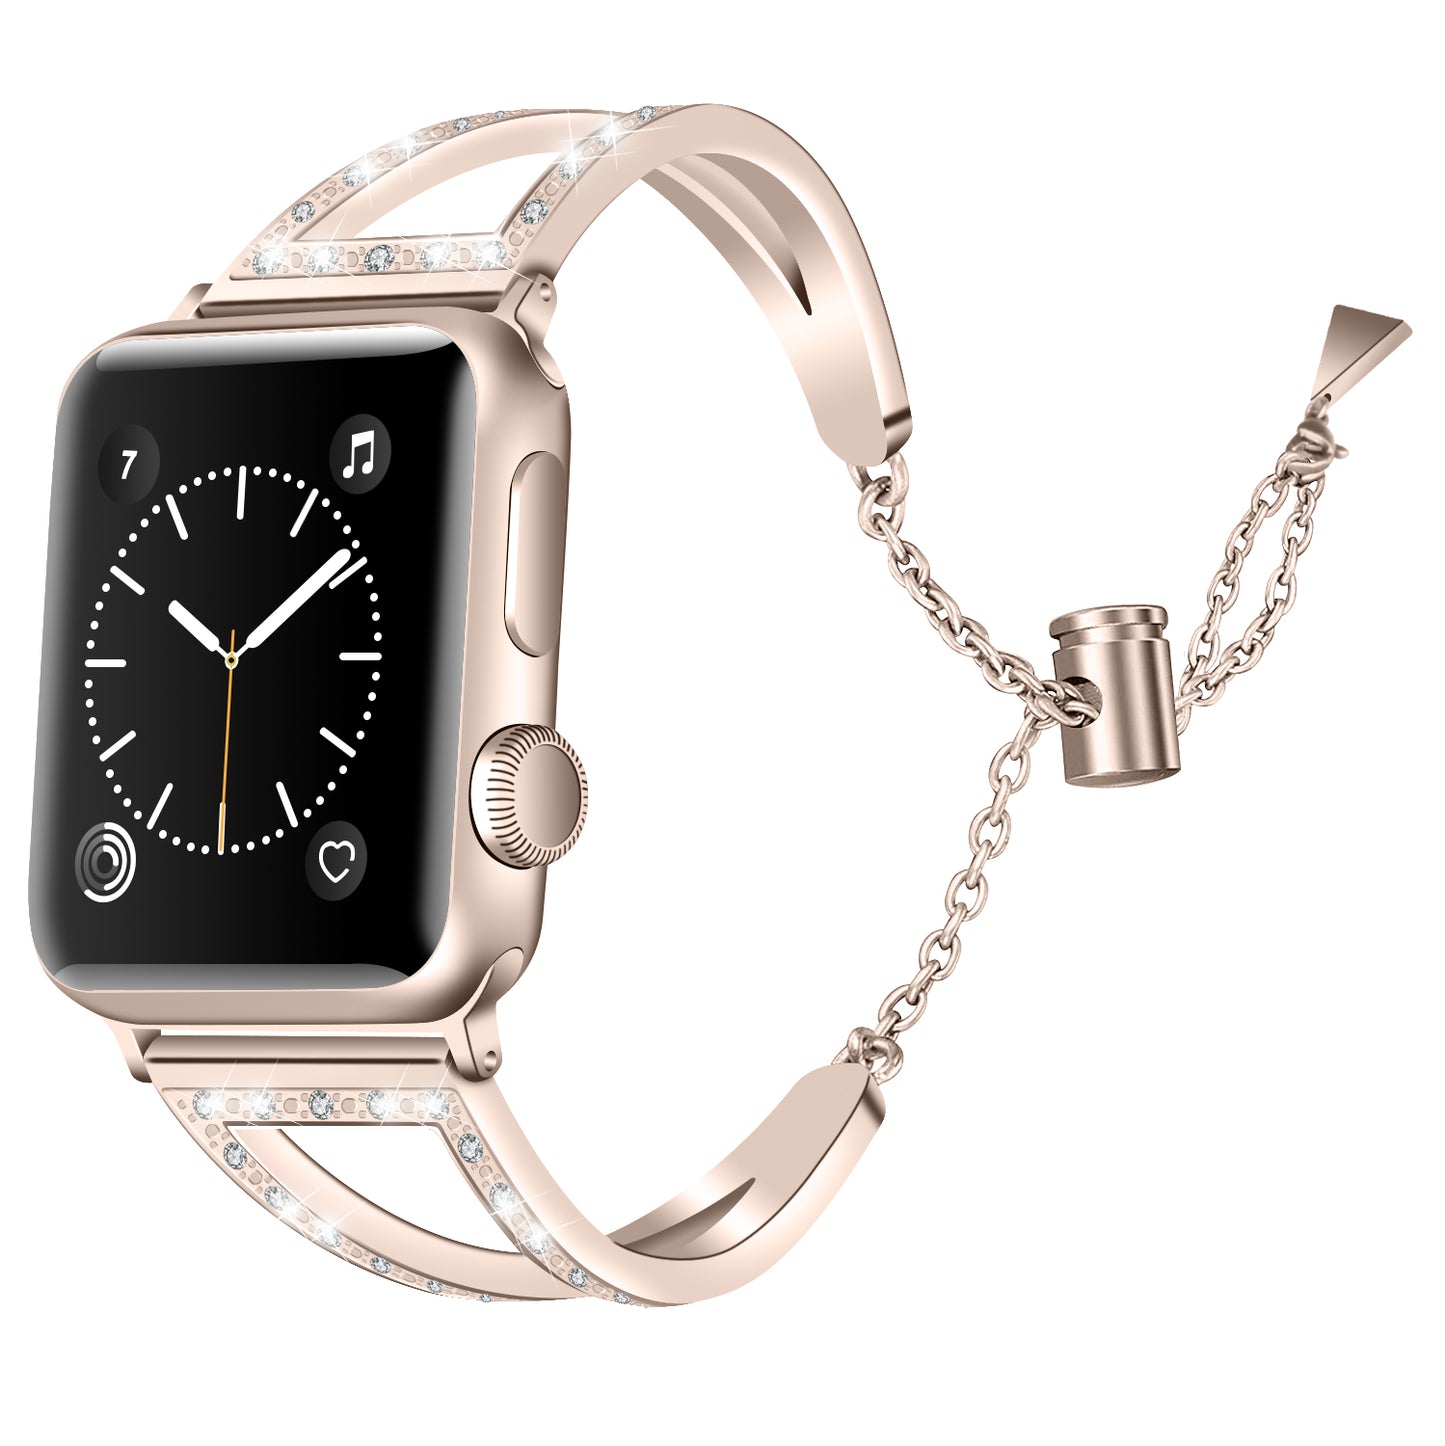 Stainless Steel Cuff Bracelet with Rhinestones for Apple Watch